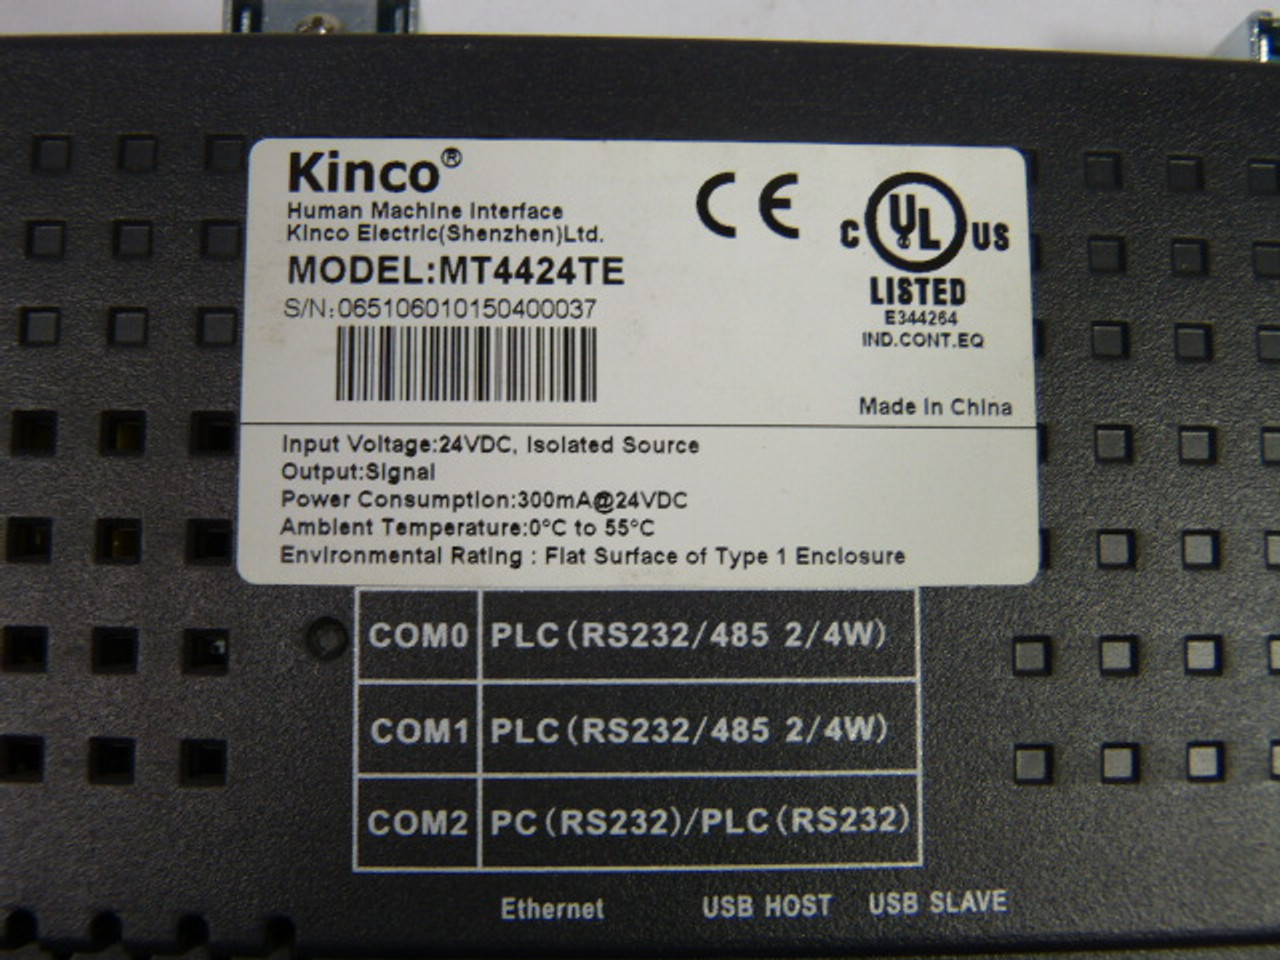 Kinco MT4424TE Operator Interface 7" Touch Display USED